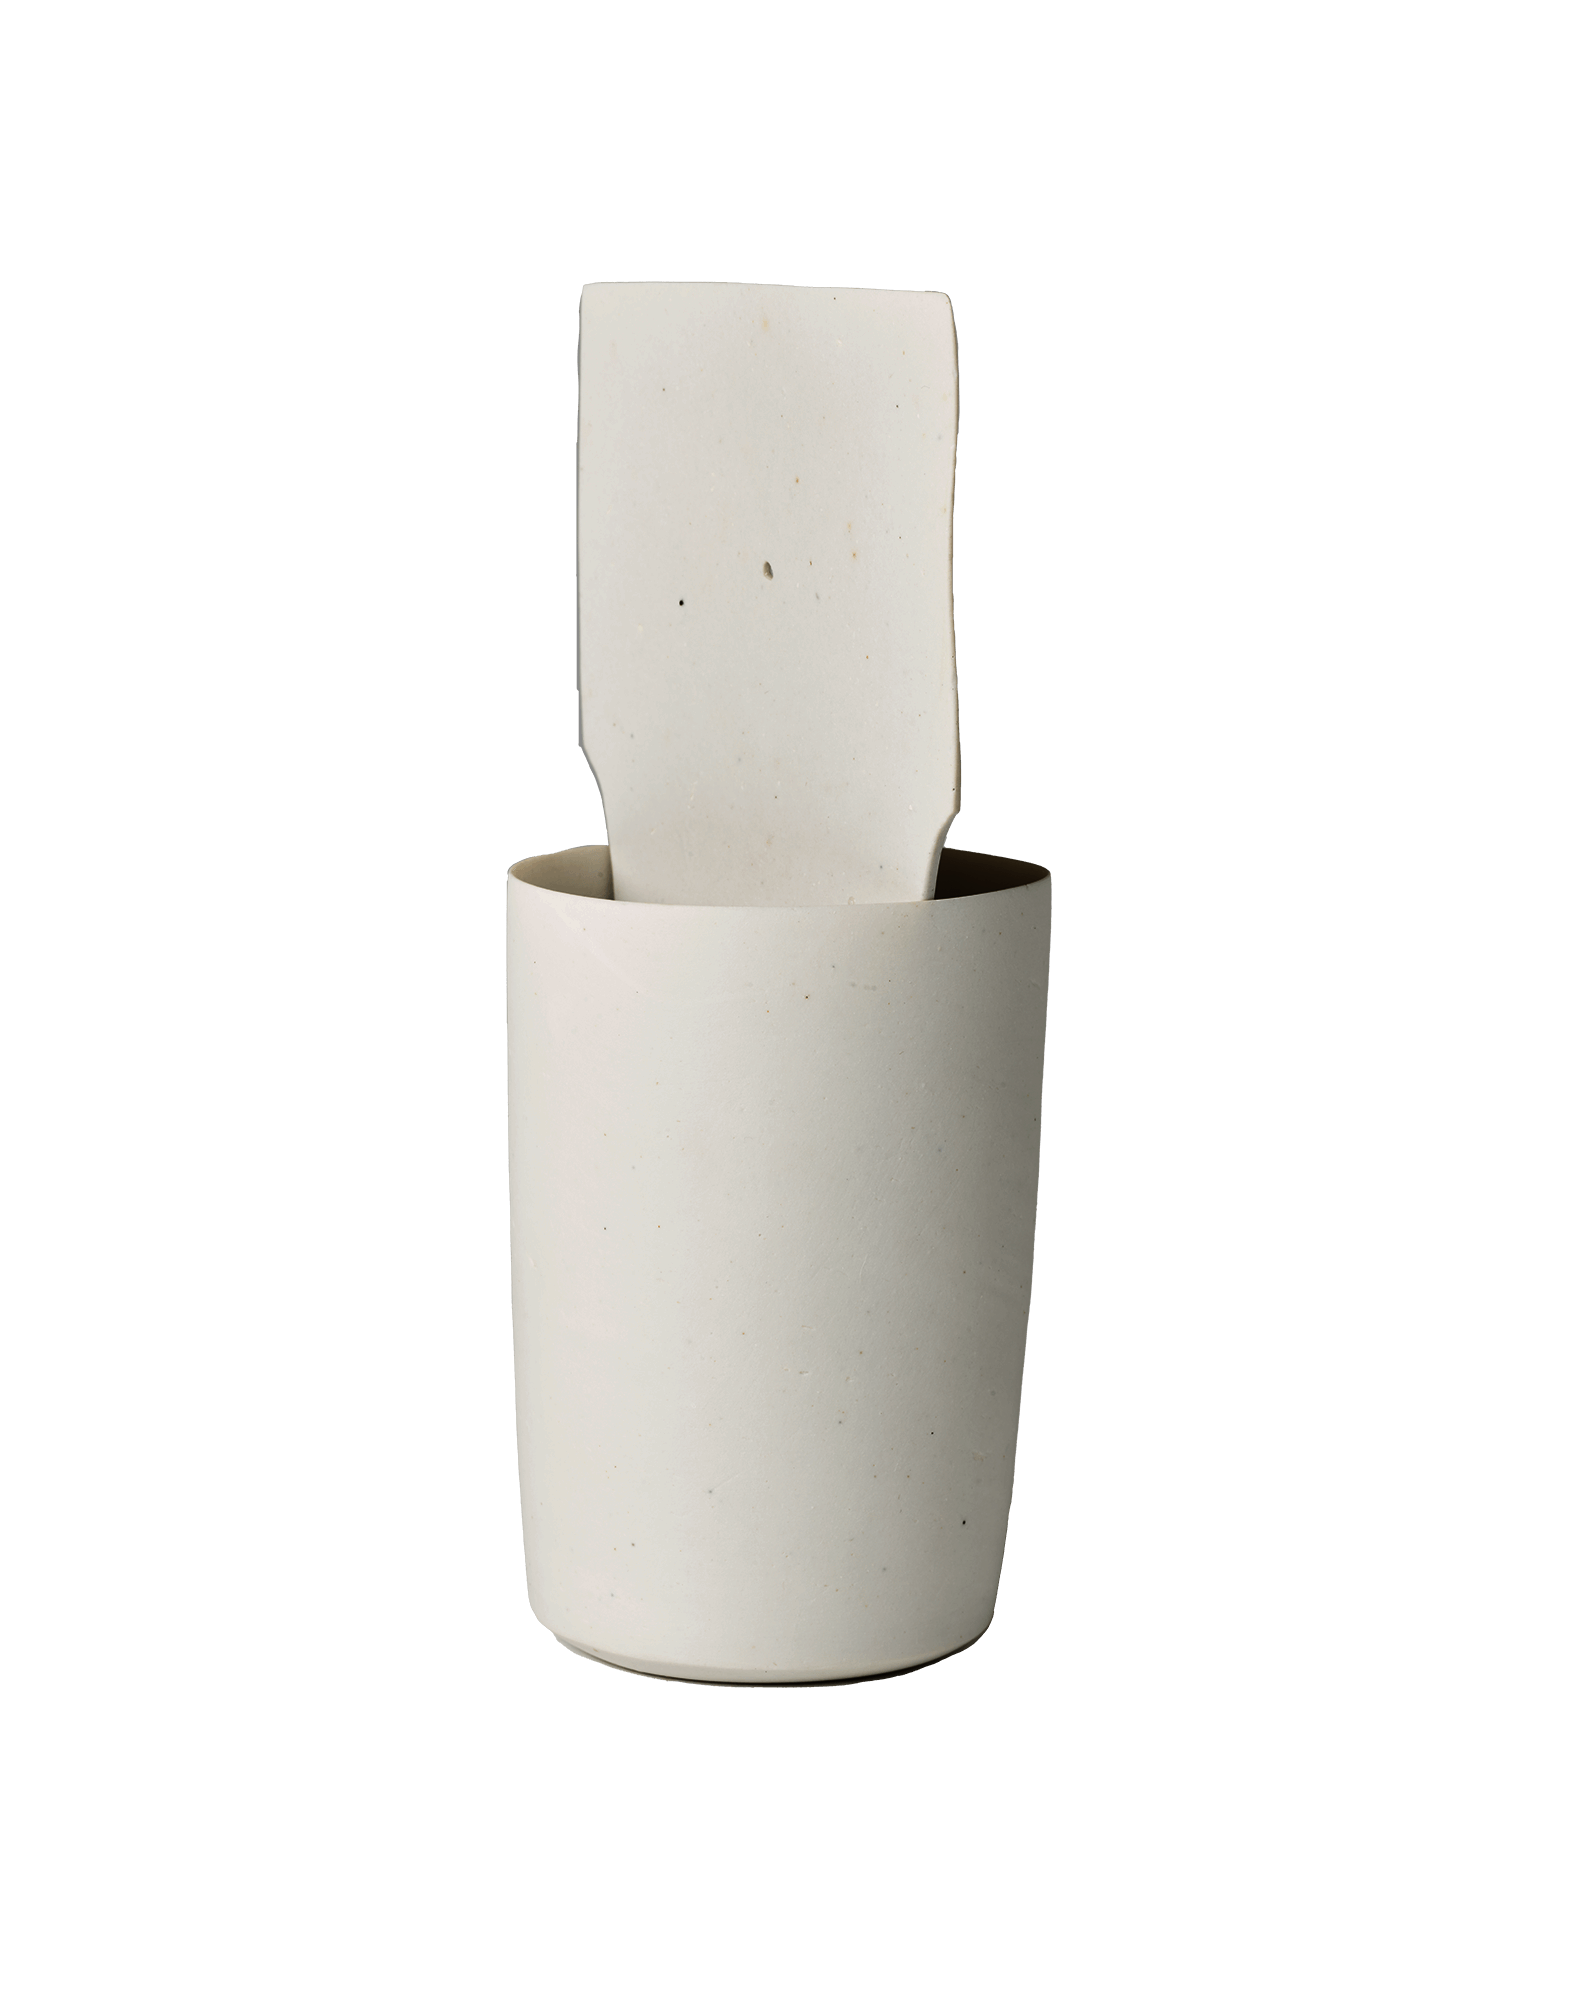 Porcelain cup with matching tapered rectangular-shaped blade inserted